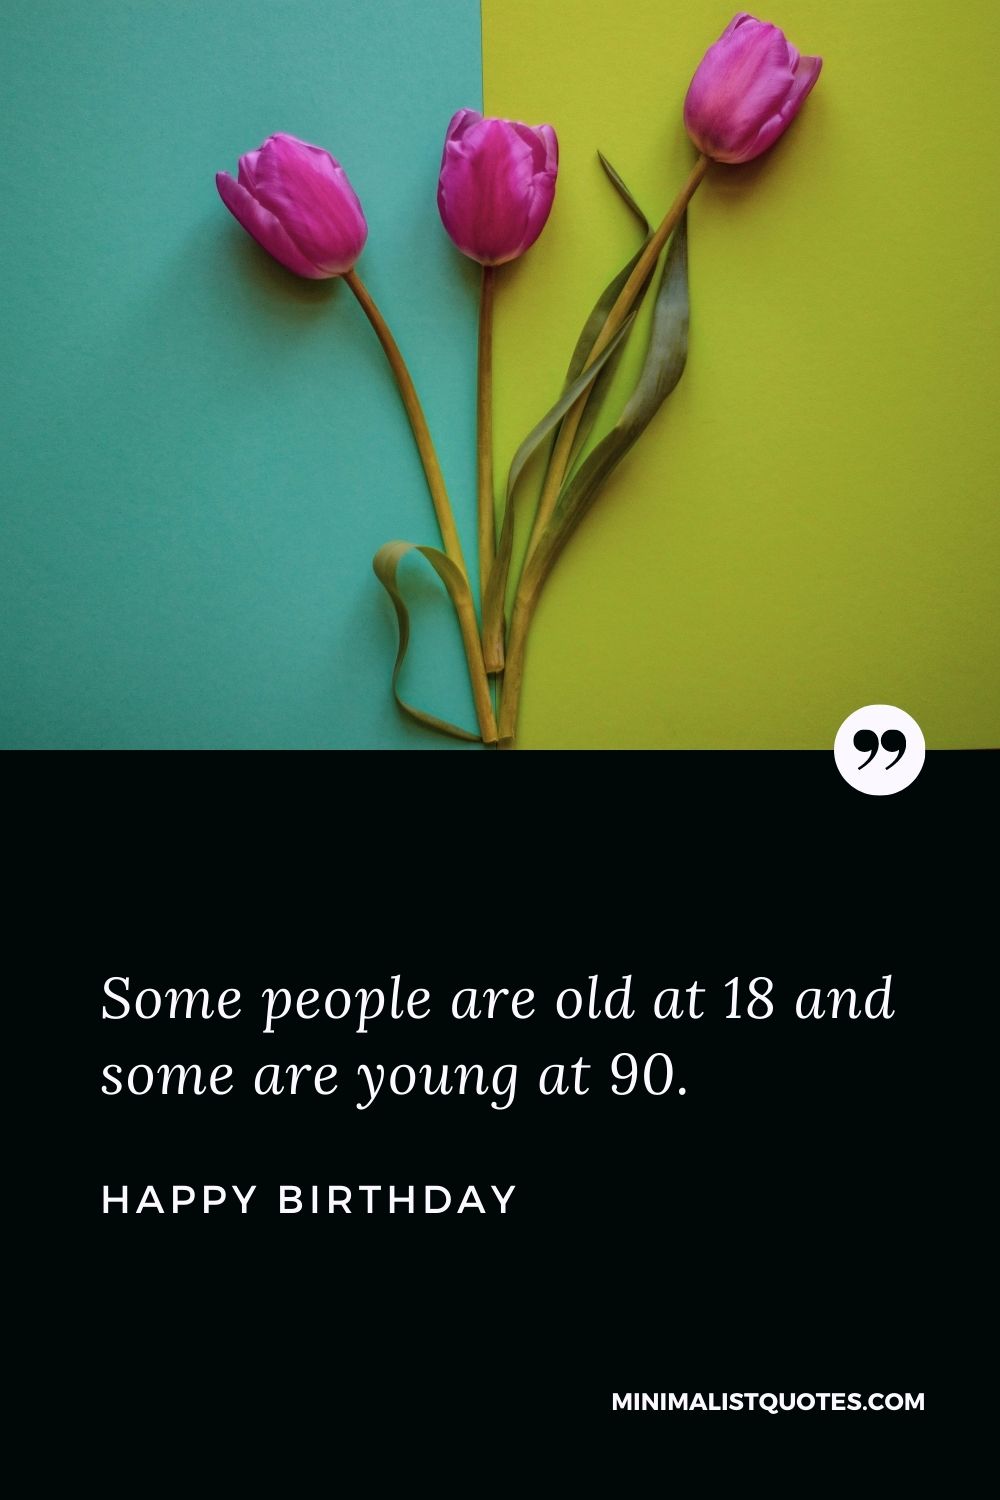 Birthday Wish & Message With HD Image: Some people are old at 18 and some are young at 90. Happy Birthday!